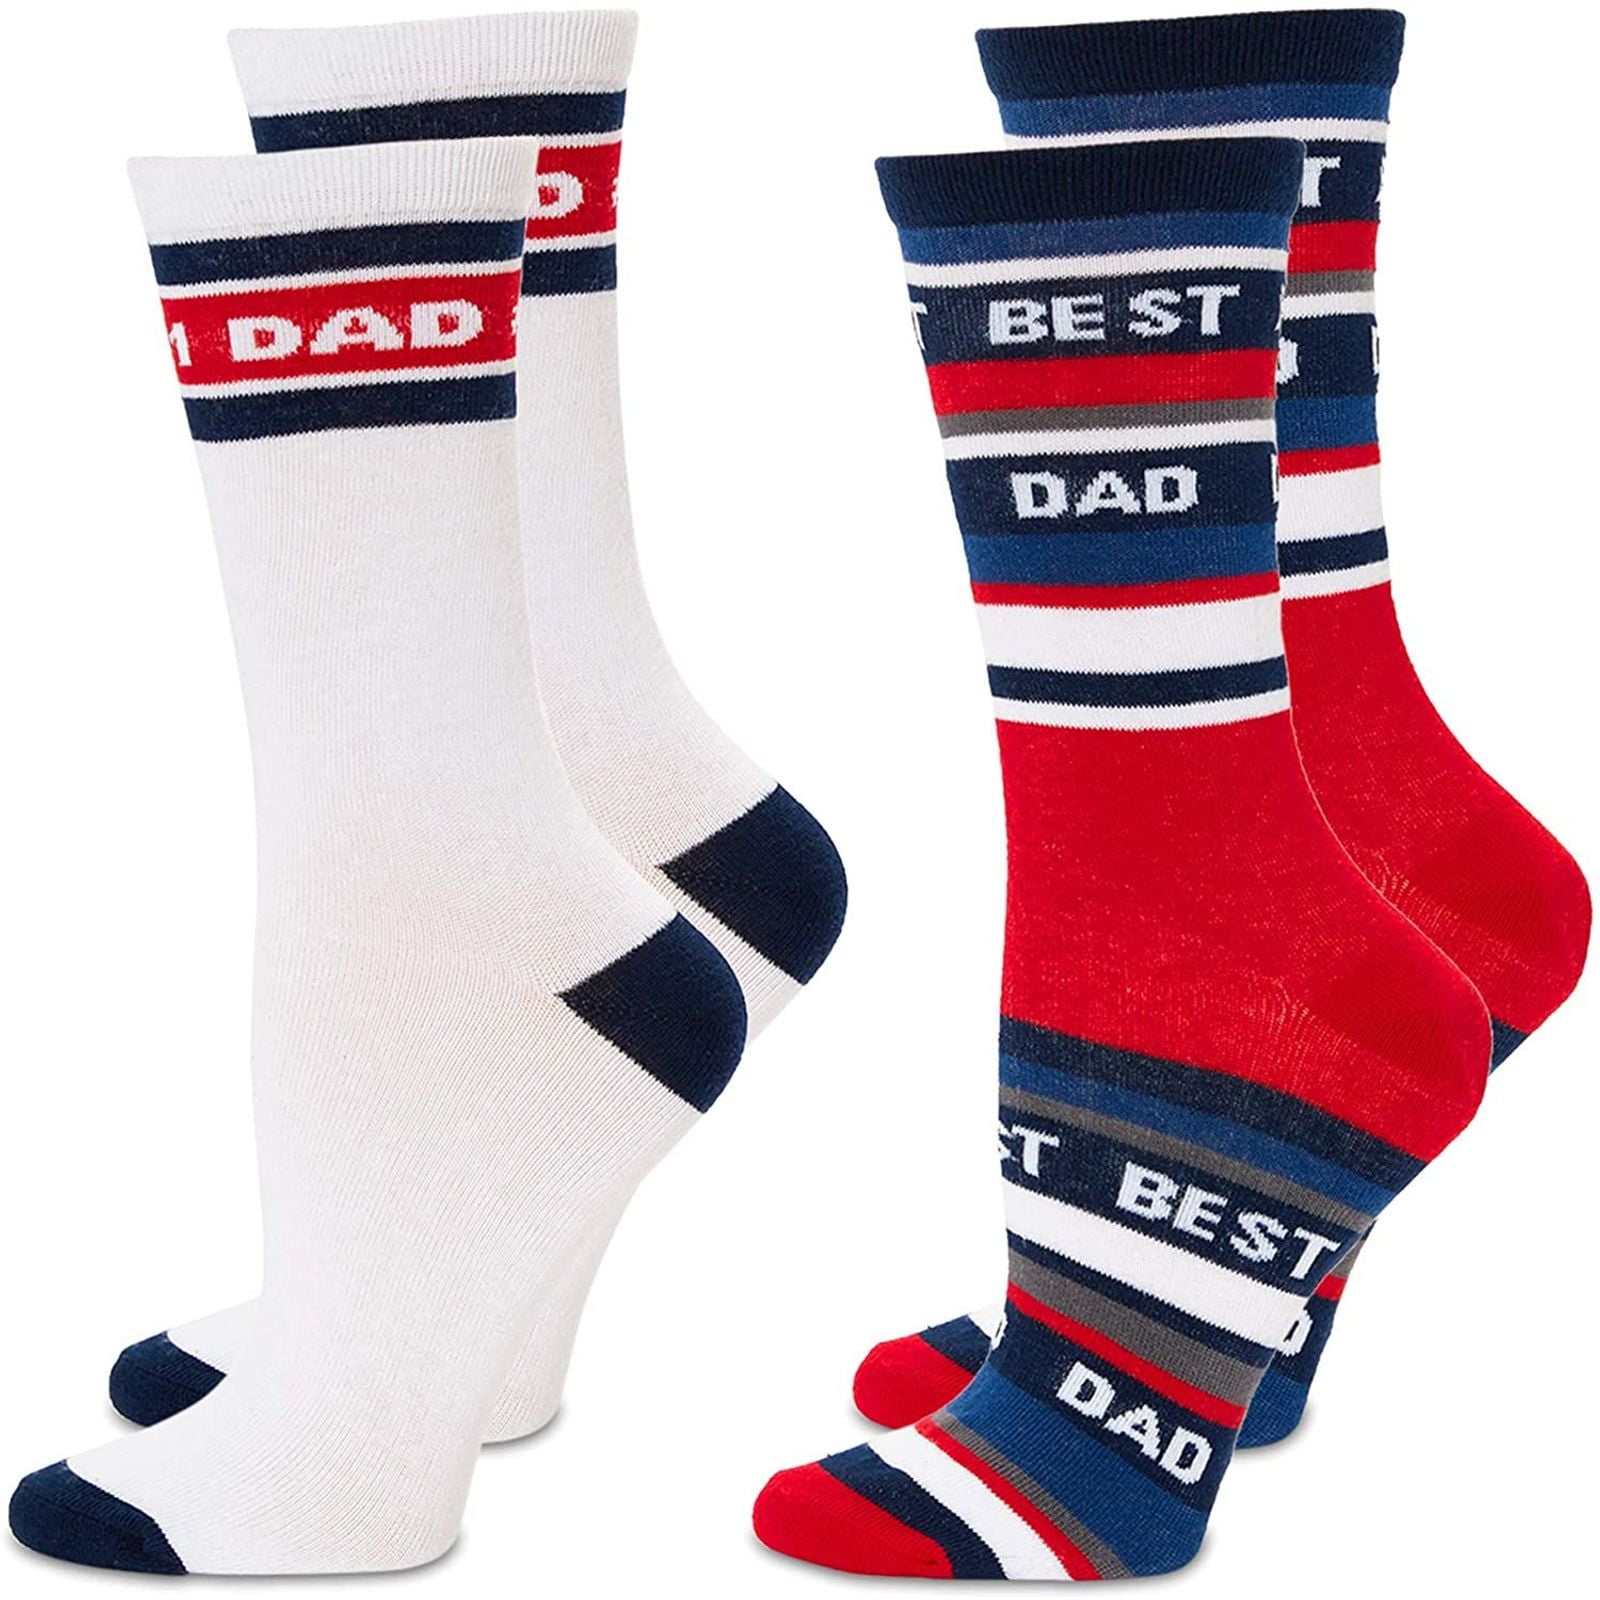 Mens Grey Socks with King of Dads Detail size 6-12 Ideal for Fathers Day 